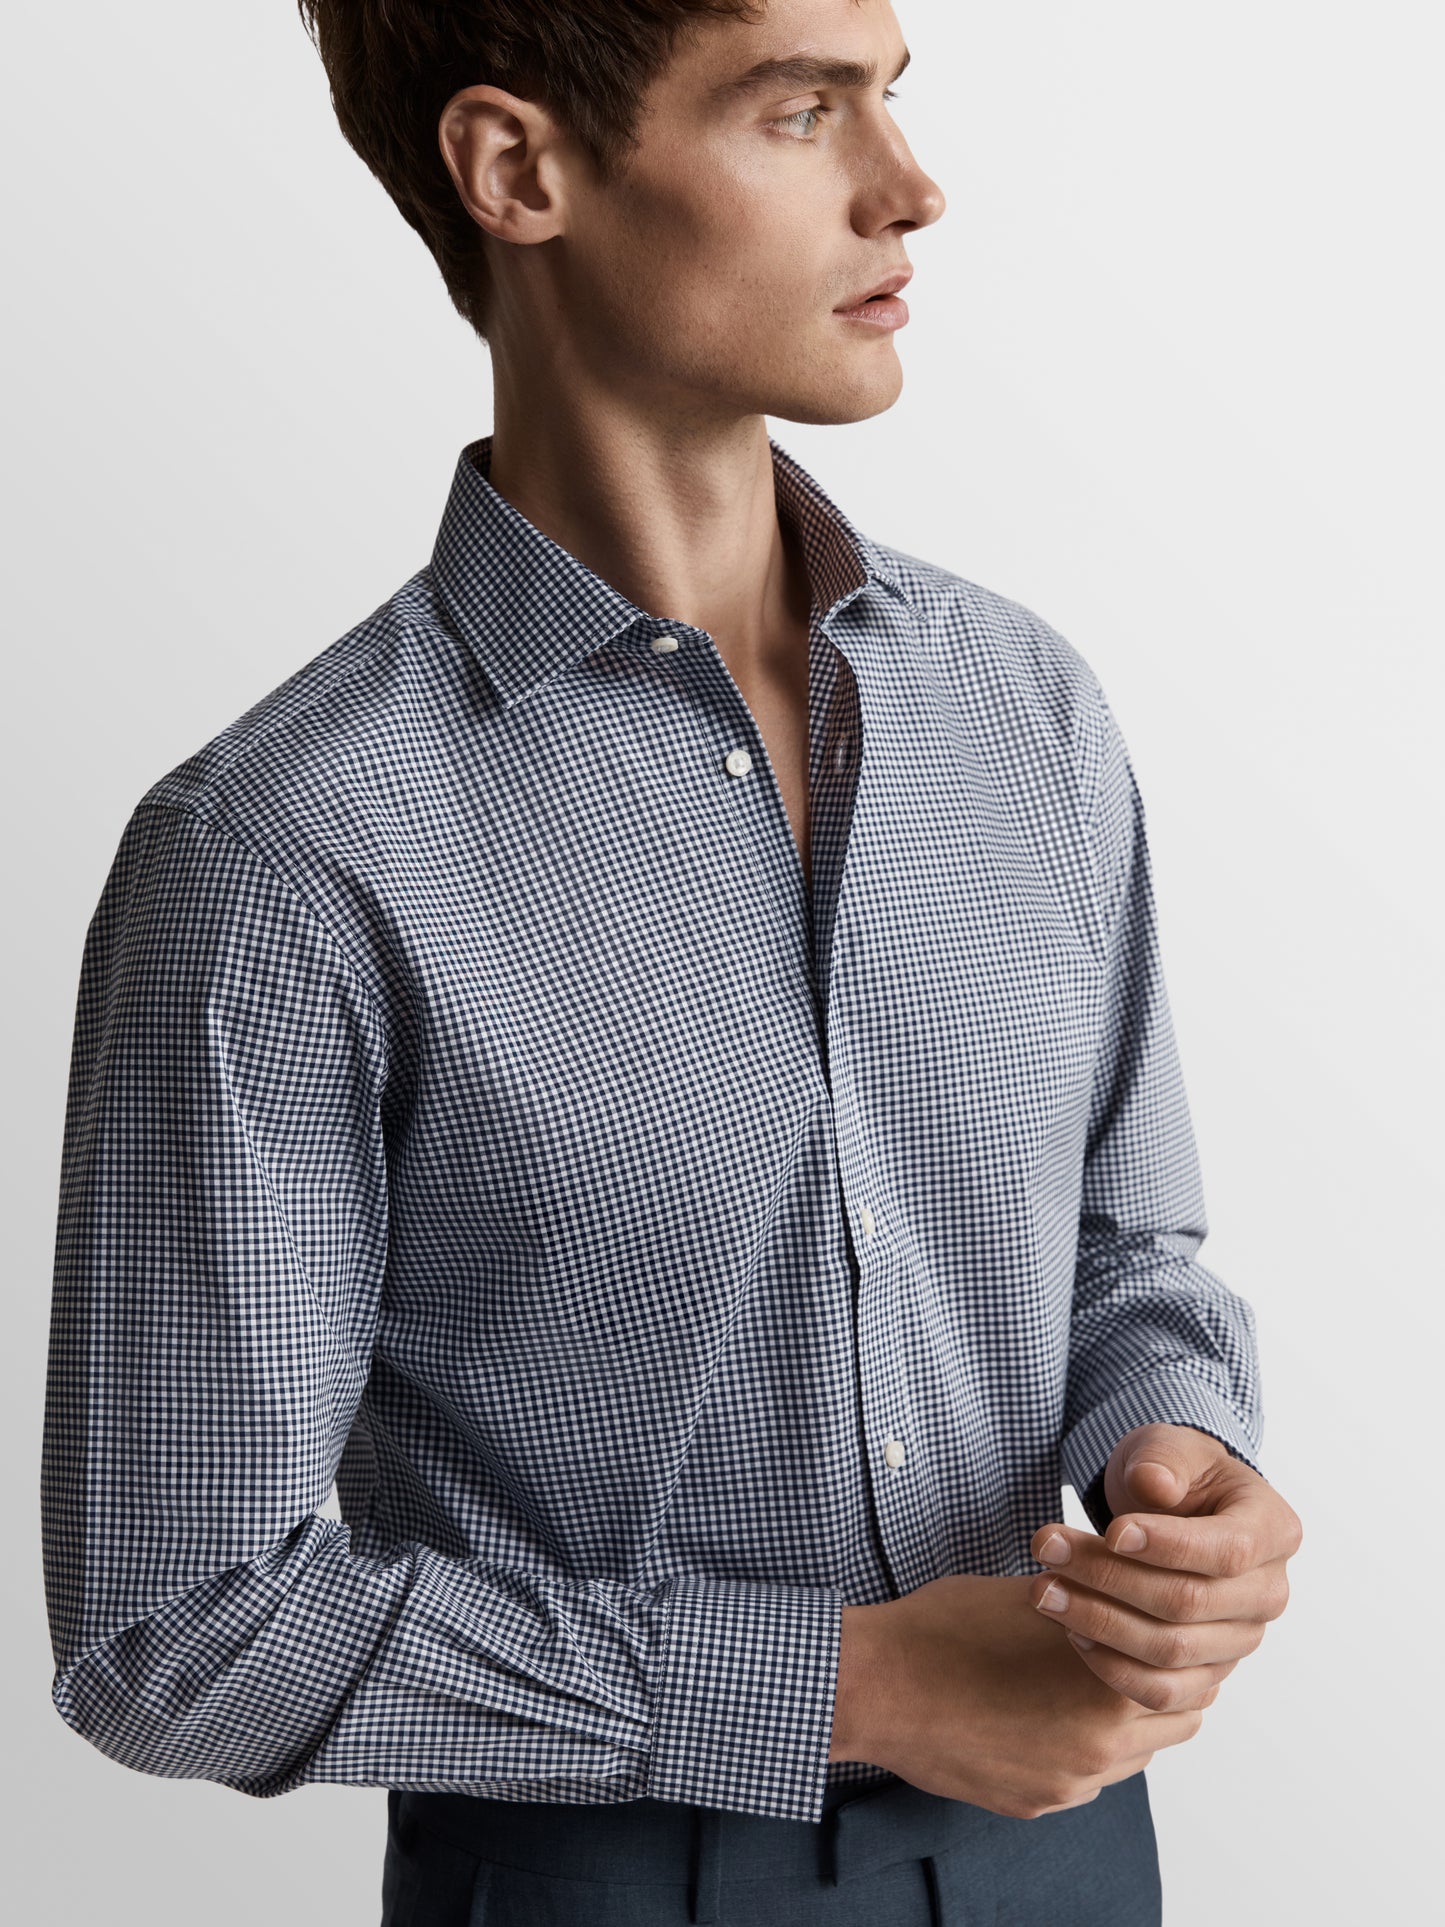 Image 2 of Max Performance Navy Blue Small Gingham Plain Weave Regular Fit Single Cuff Classic Collar Shirt